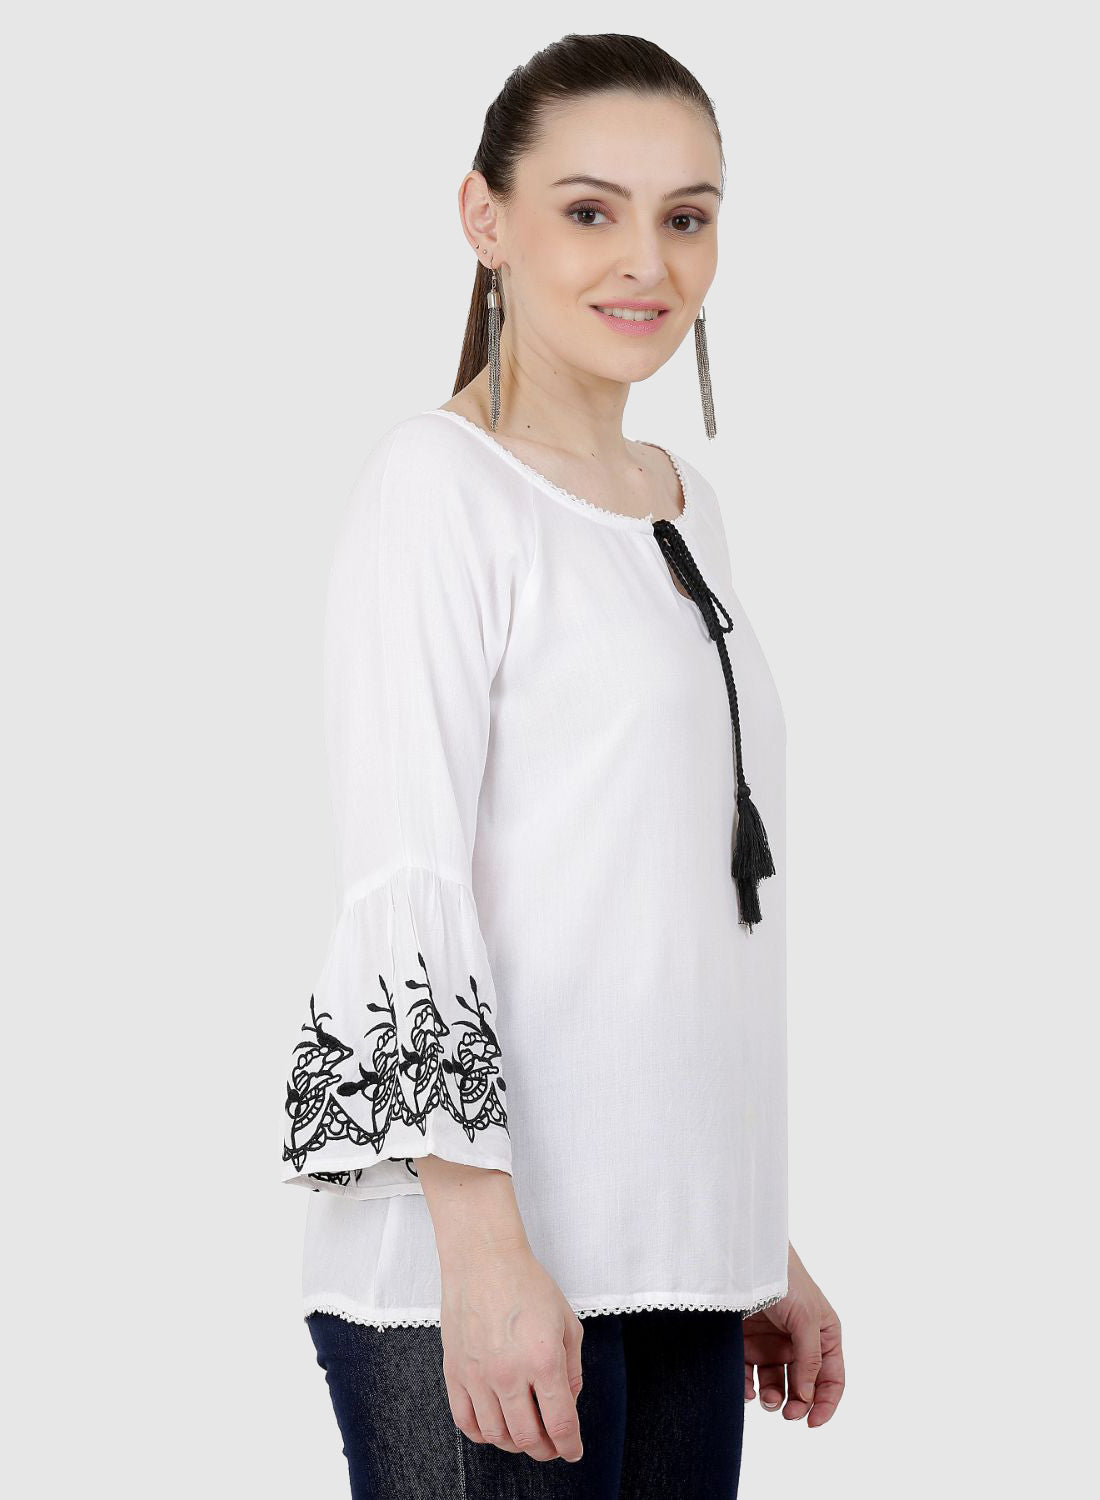 Women Top White Casual Regular Fit Bell Sleeve